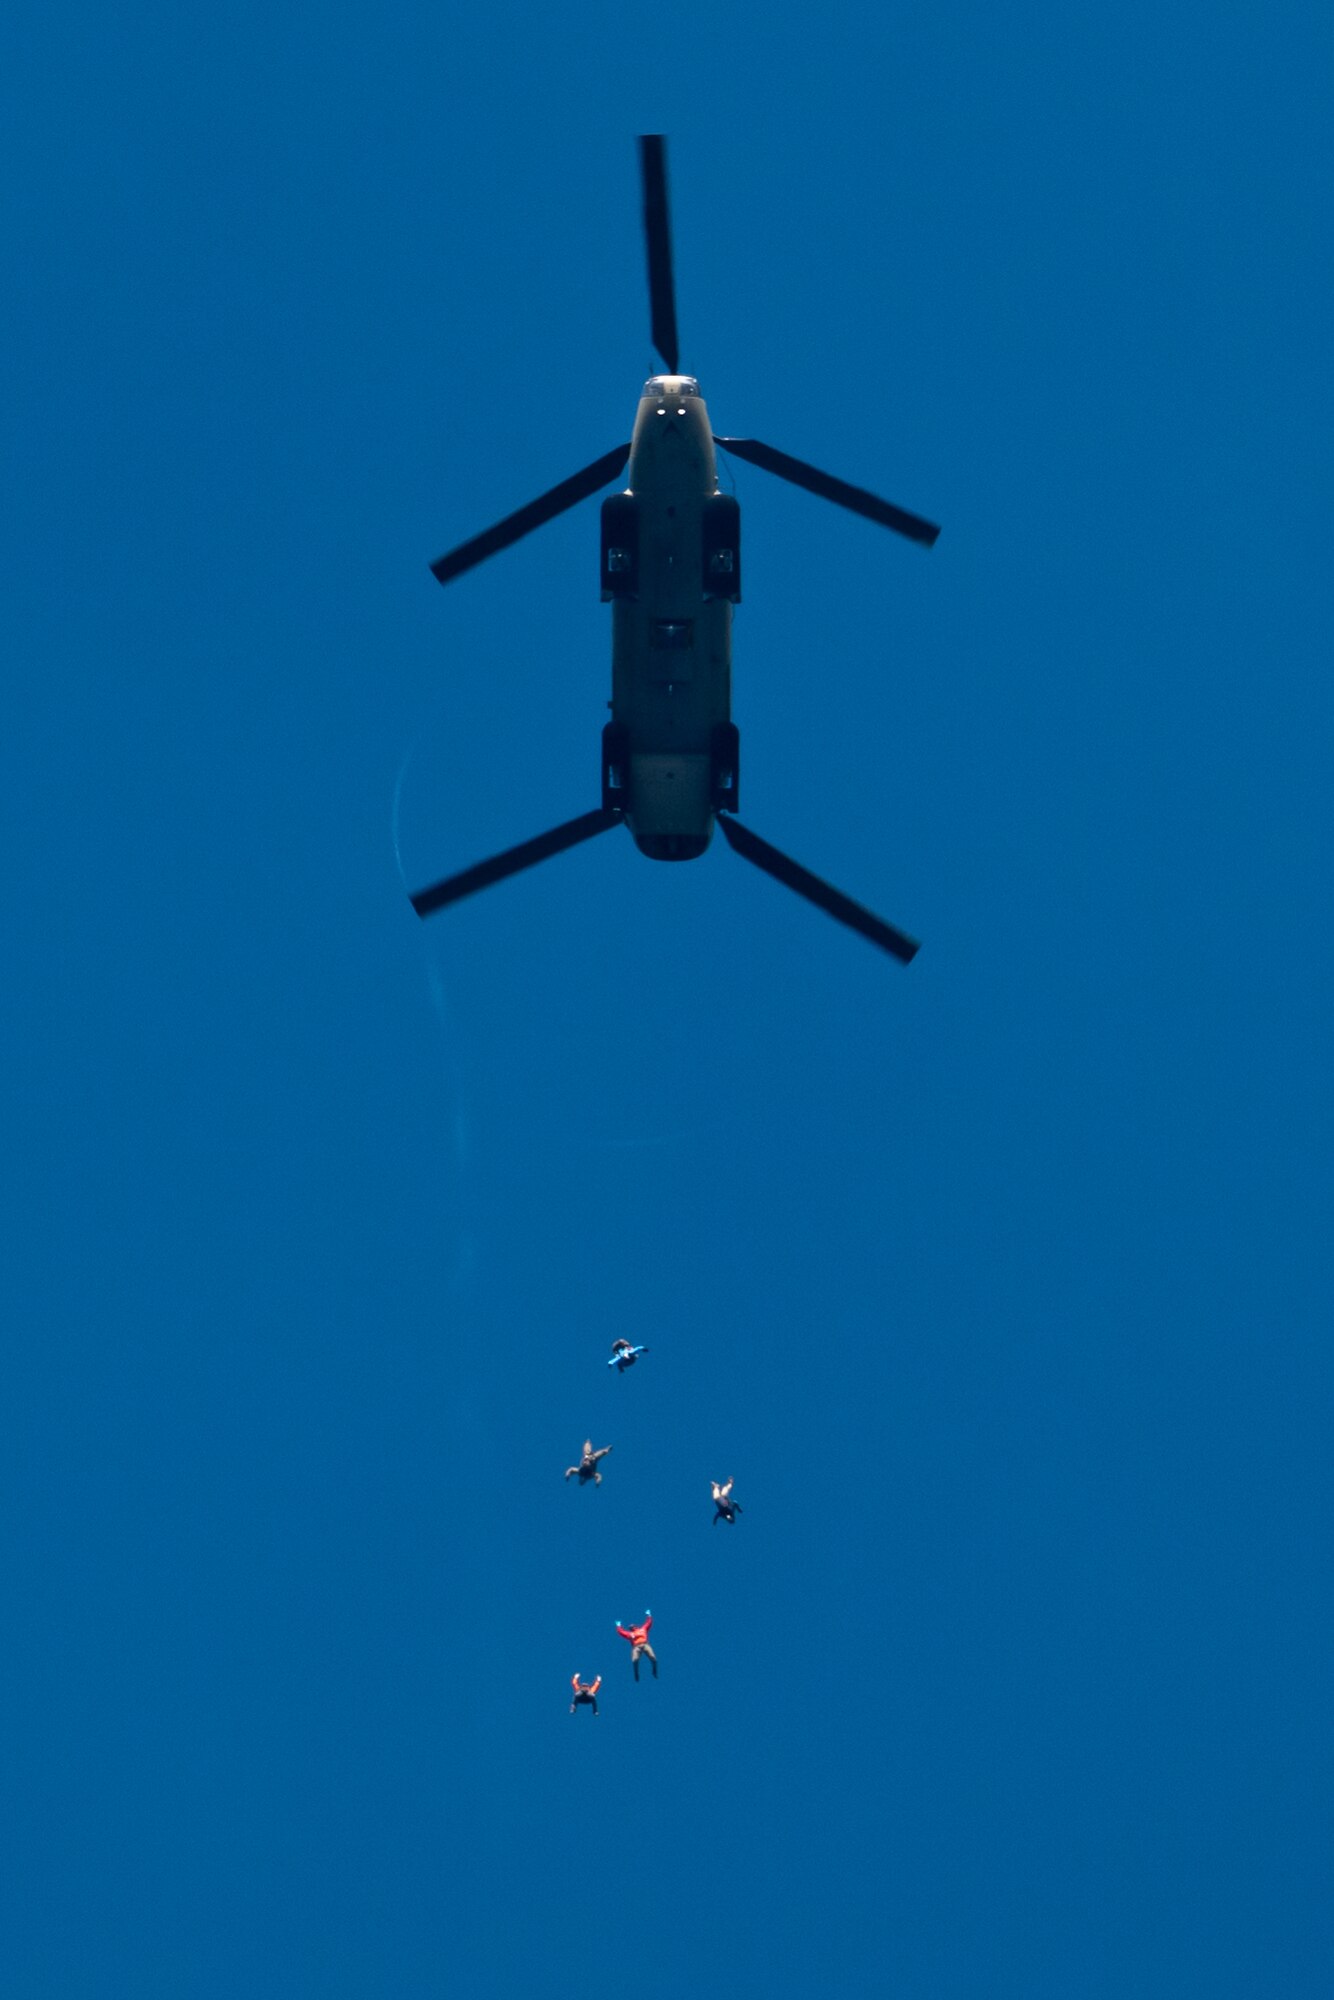 U.S. Air Force pararescuemen assigned to the 212th Rescue Squadron, Alaska Air National Guard, leap from a CH-47F Chinook operated by Detachment 1, Bravo Company, 2-211th General Service Aviation Battalion, during a training event at Joint Base Elmendorf-Richardson, Alaska.